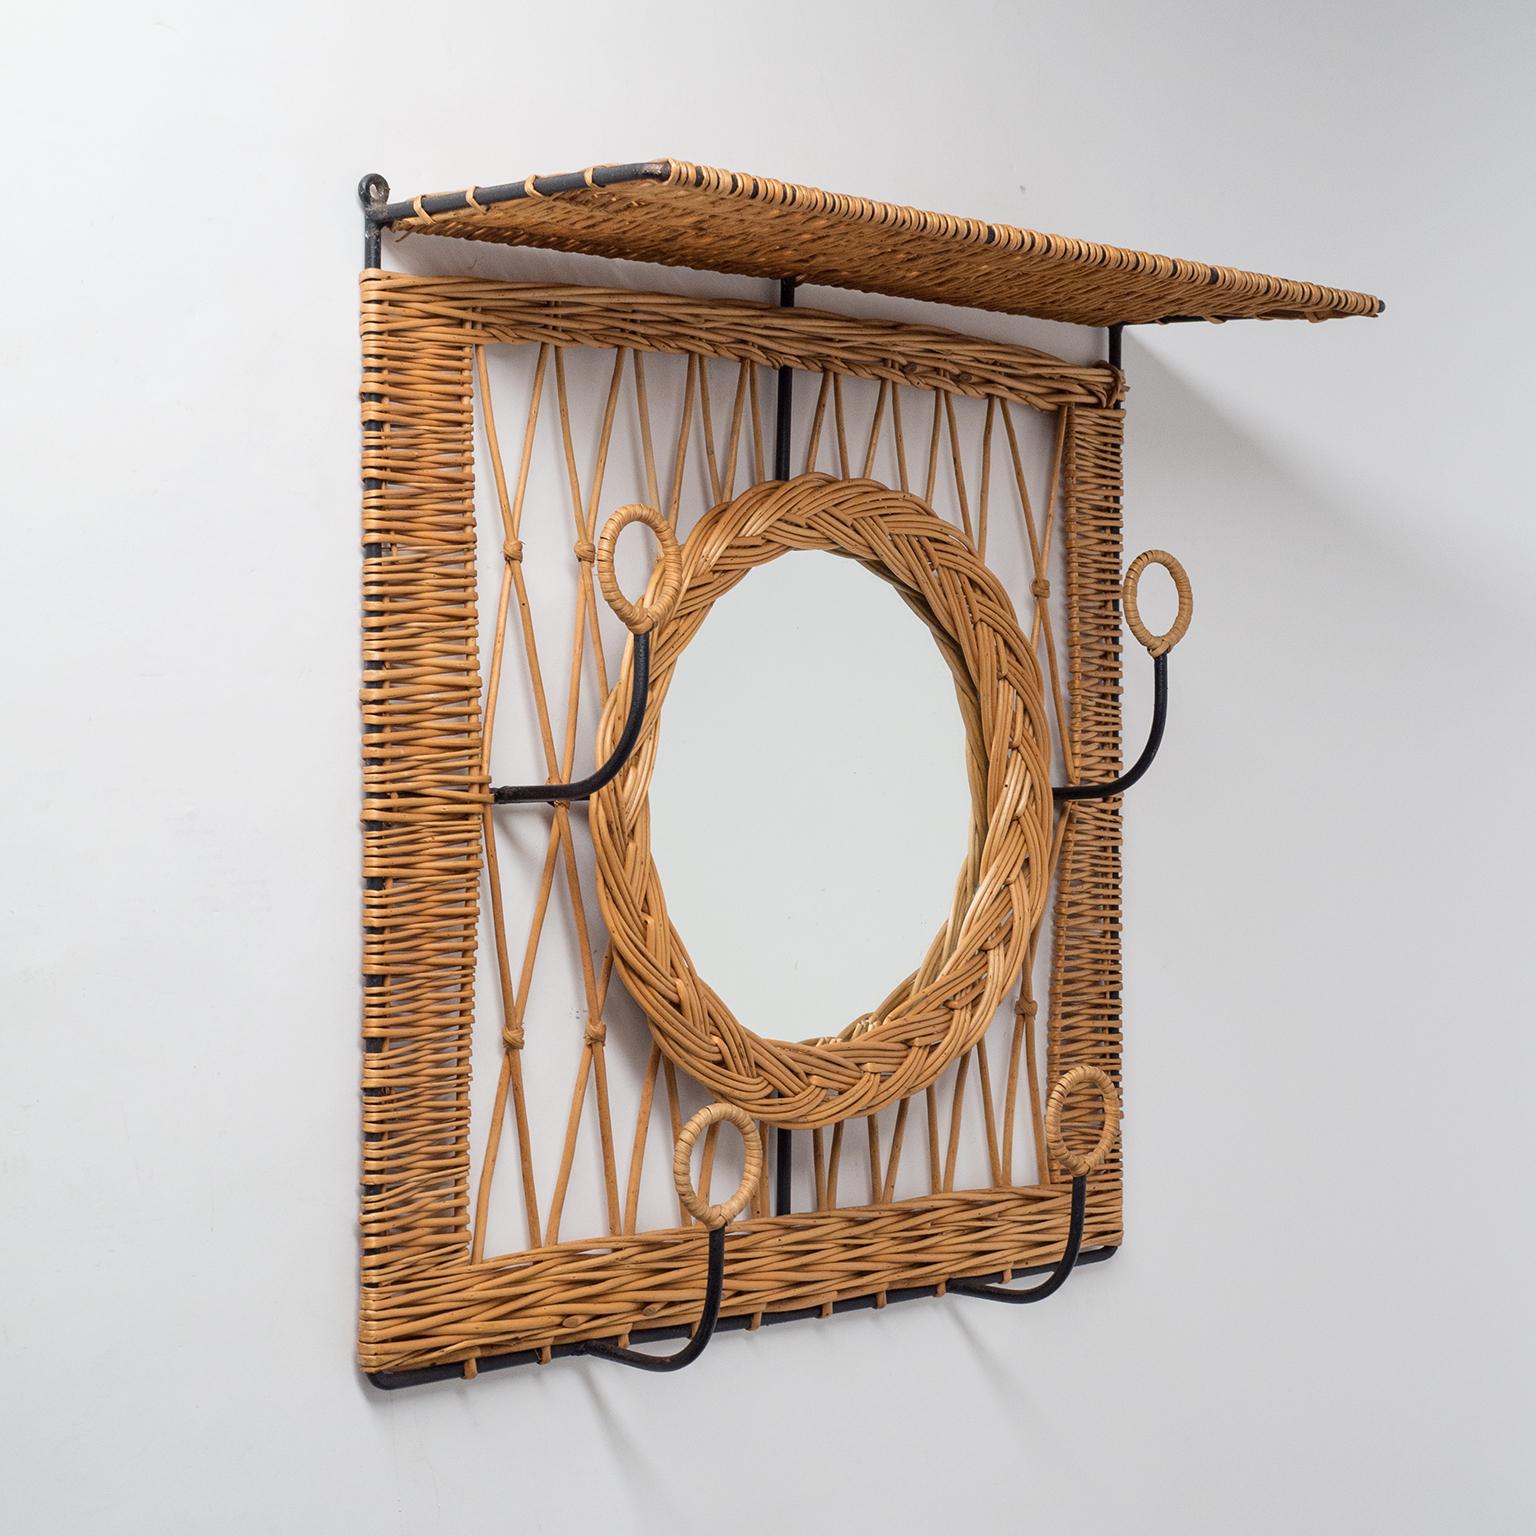 Rare French wall-mounted rattan coat and hat rack with mirror from the 1960s. Blackened steel structure with intricate rattan weaving in varying patterns and original mirror.